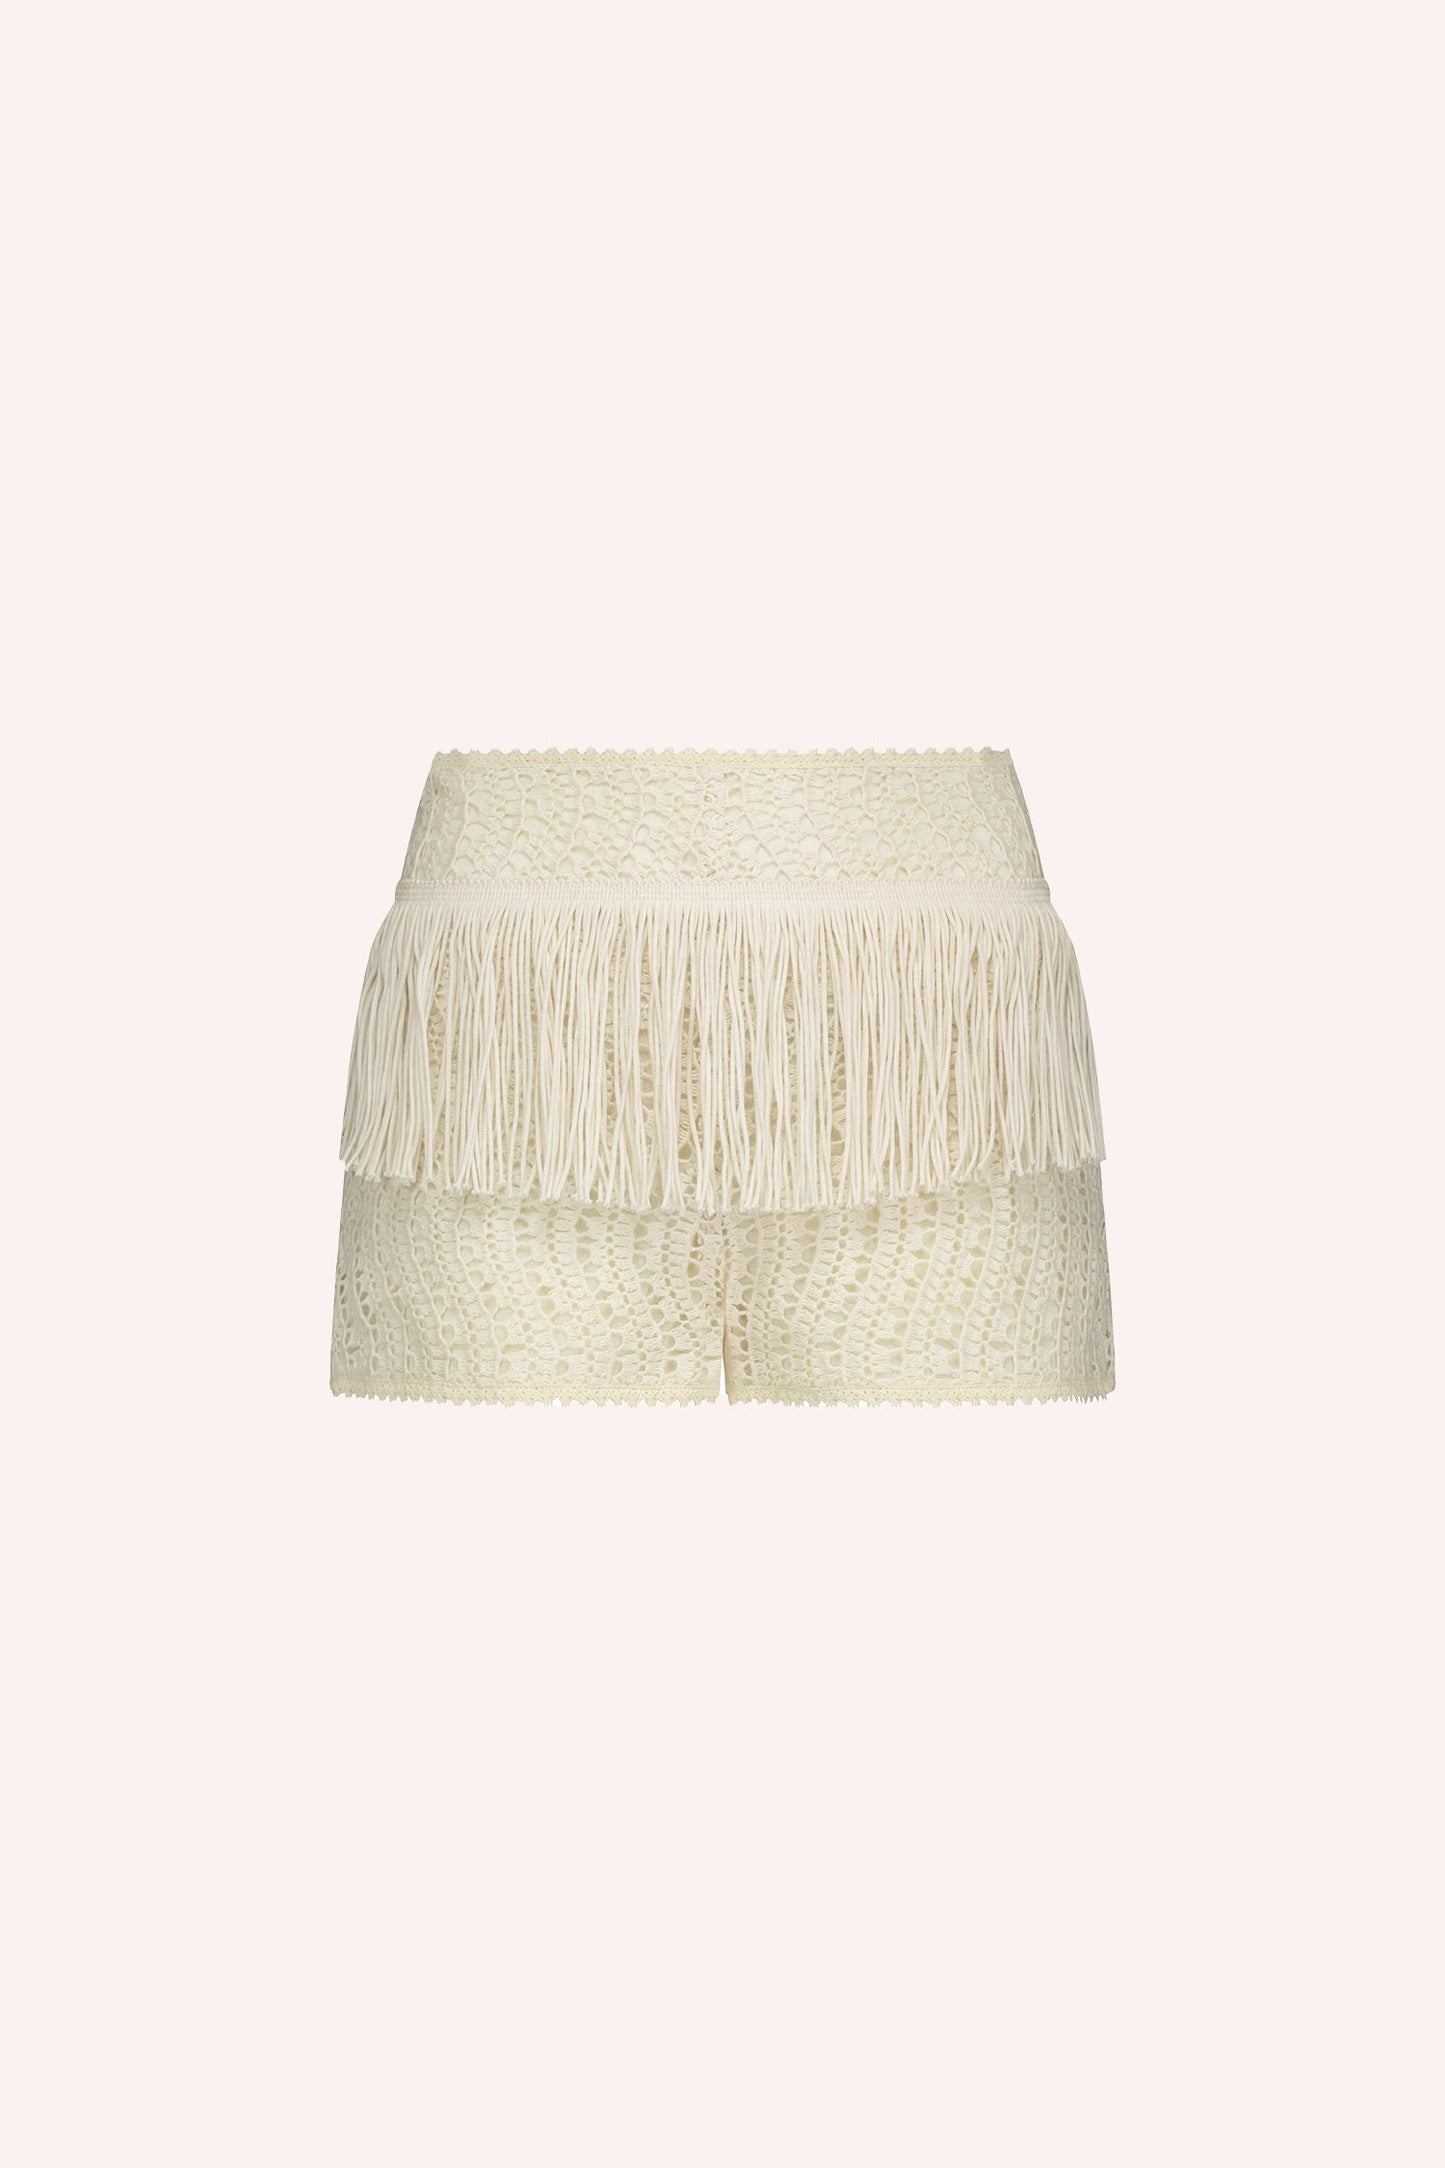 Anna Sui Crochet Lace Shorts Cream, with a short fringe belt around the hips, 